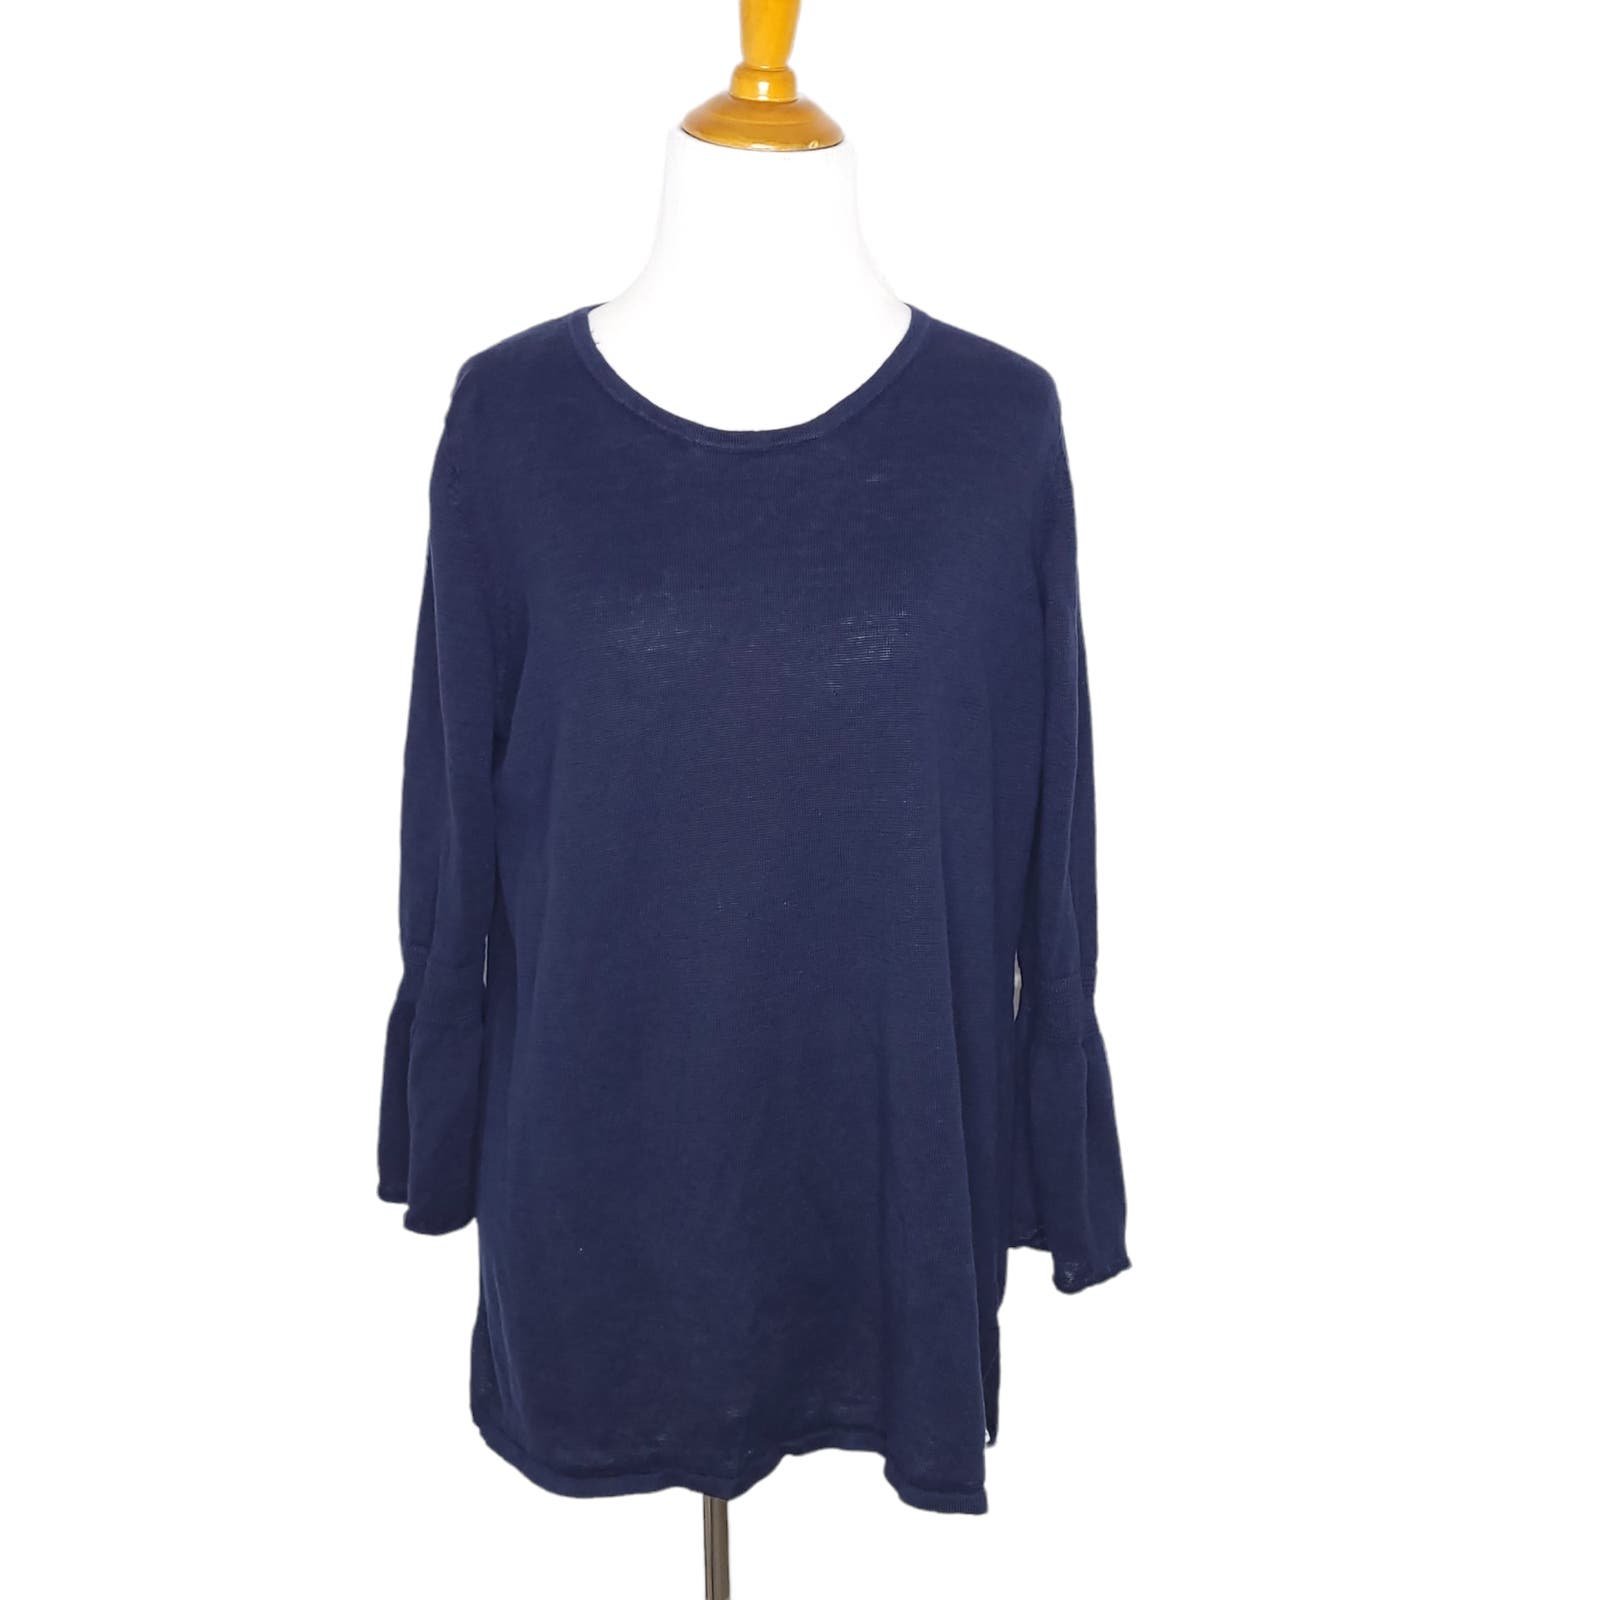 Talbots Linen Blouse Navy 3/4 Bell Sleeves Scoop Neck Large dXowPpaQP